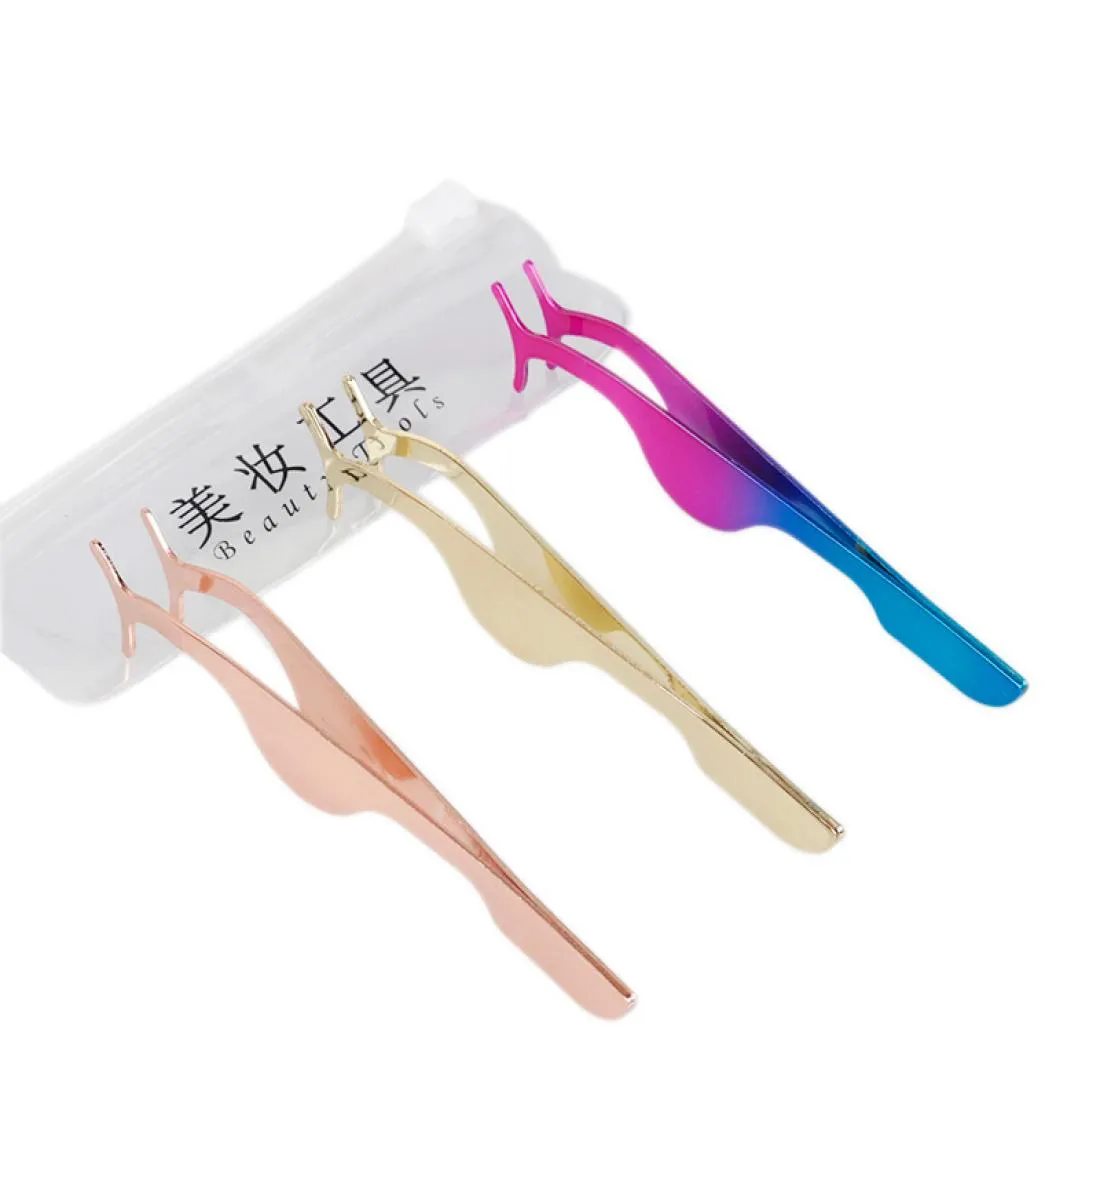 Makeup Tools Stainless Steel False Eyelash Tweezers Applicator Clip to Put Eyelashes on with Retail Package Whole2218111